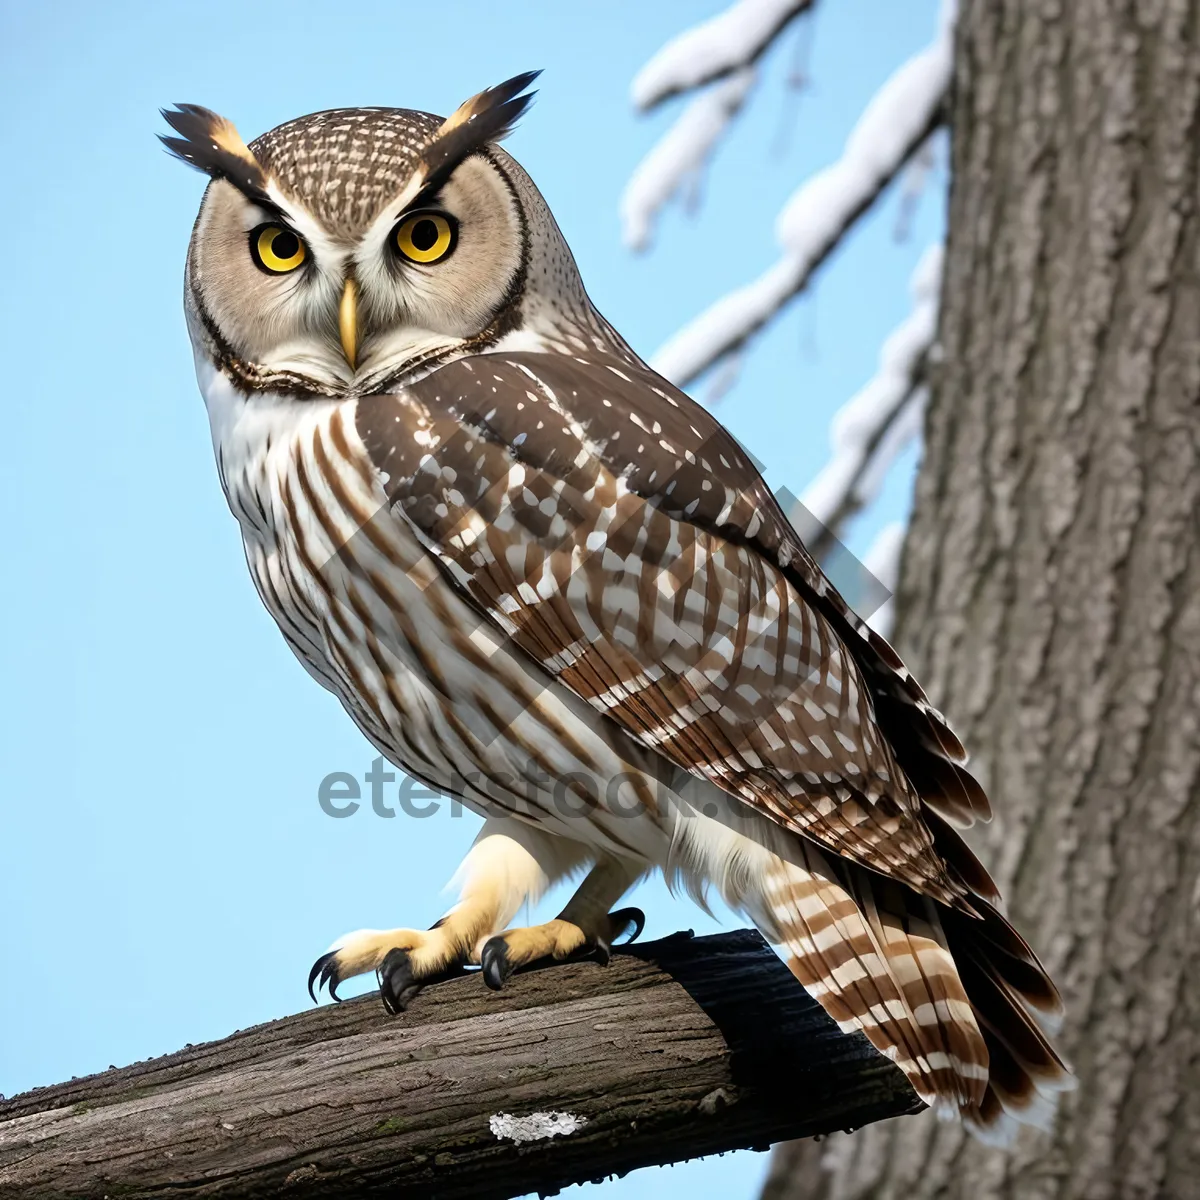 Picture of Intense Gaze: Majestic Hunting Bird with Yellow Eyes